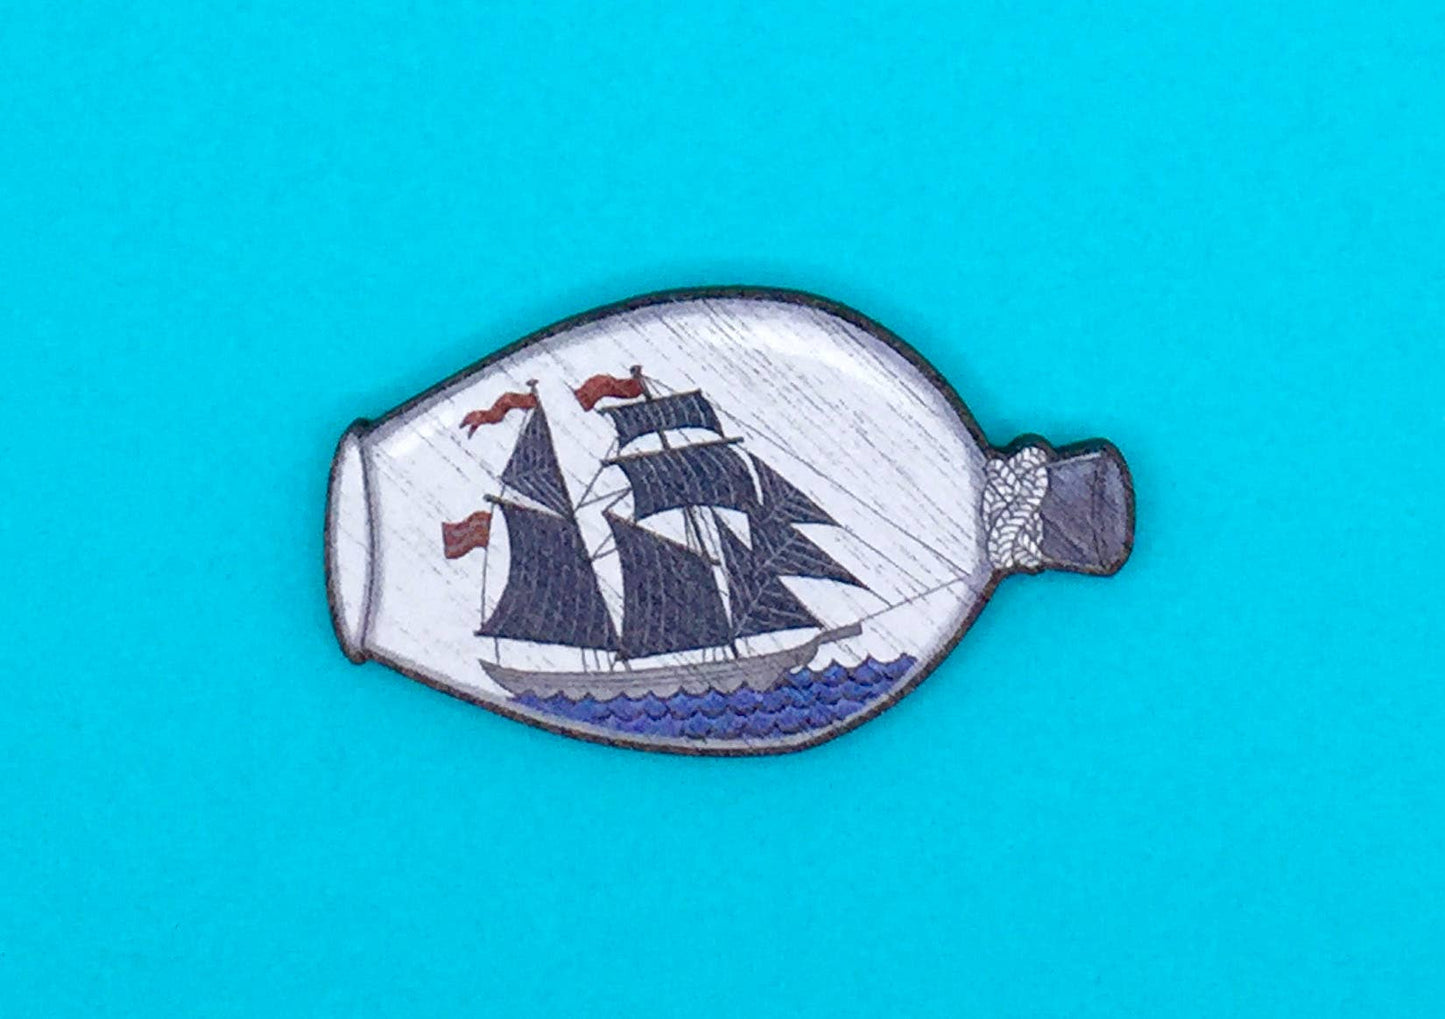 Ship in Bottle Wooden Pin Brooch / Nautical Pin Badge